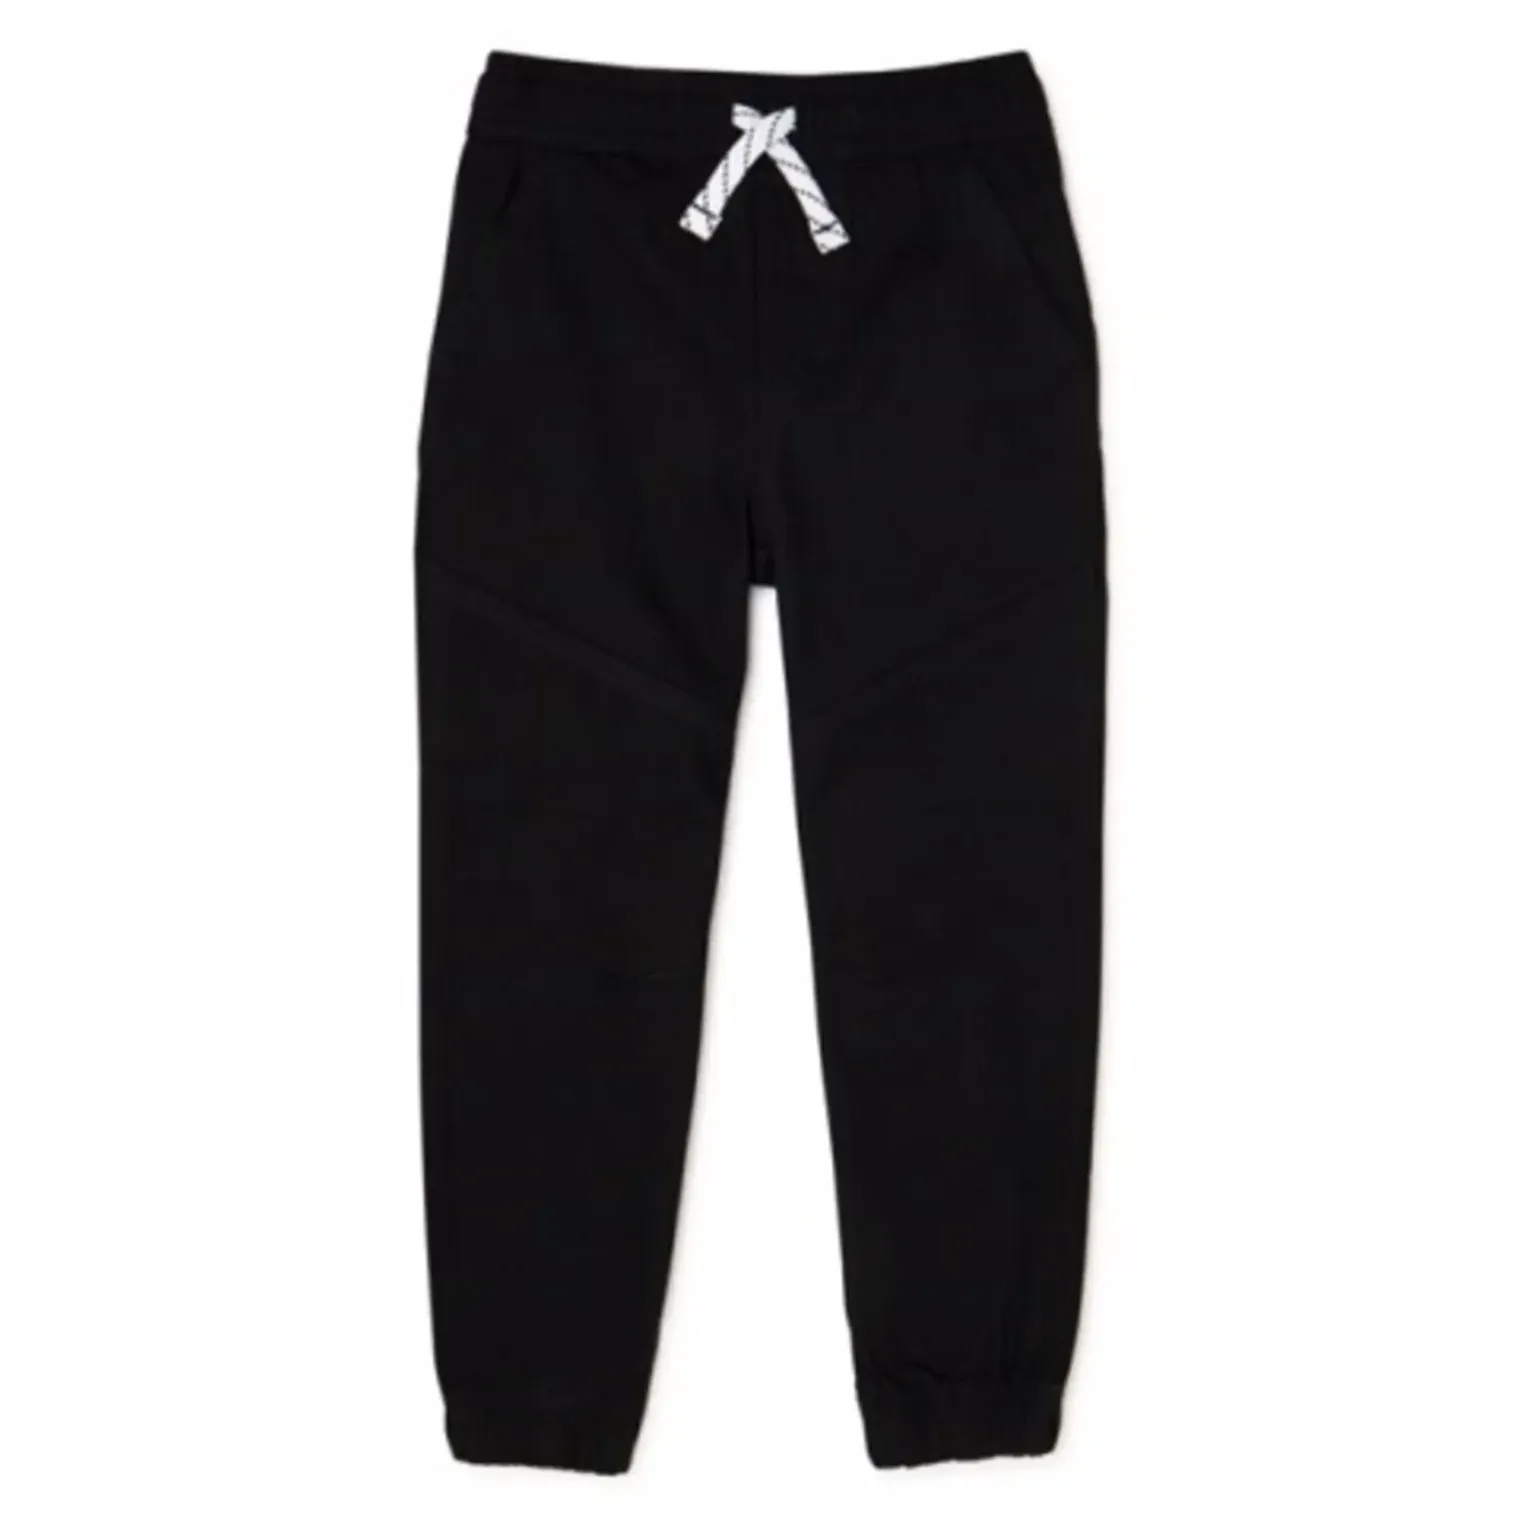 Manufacturing Boys Jogging Trouser with color durability